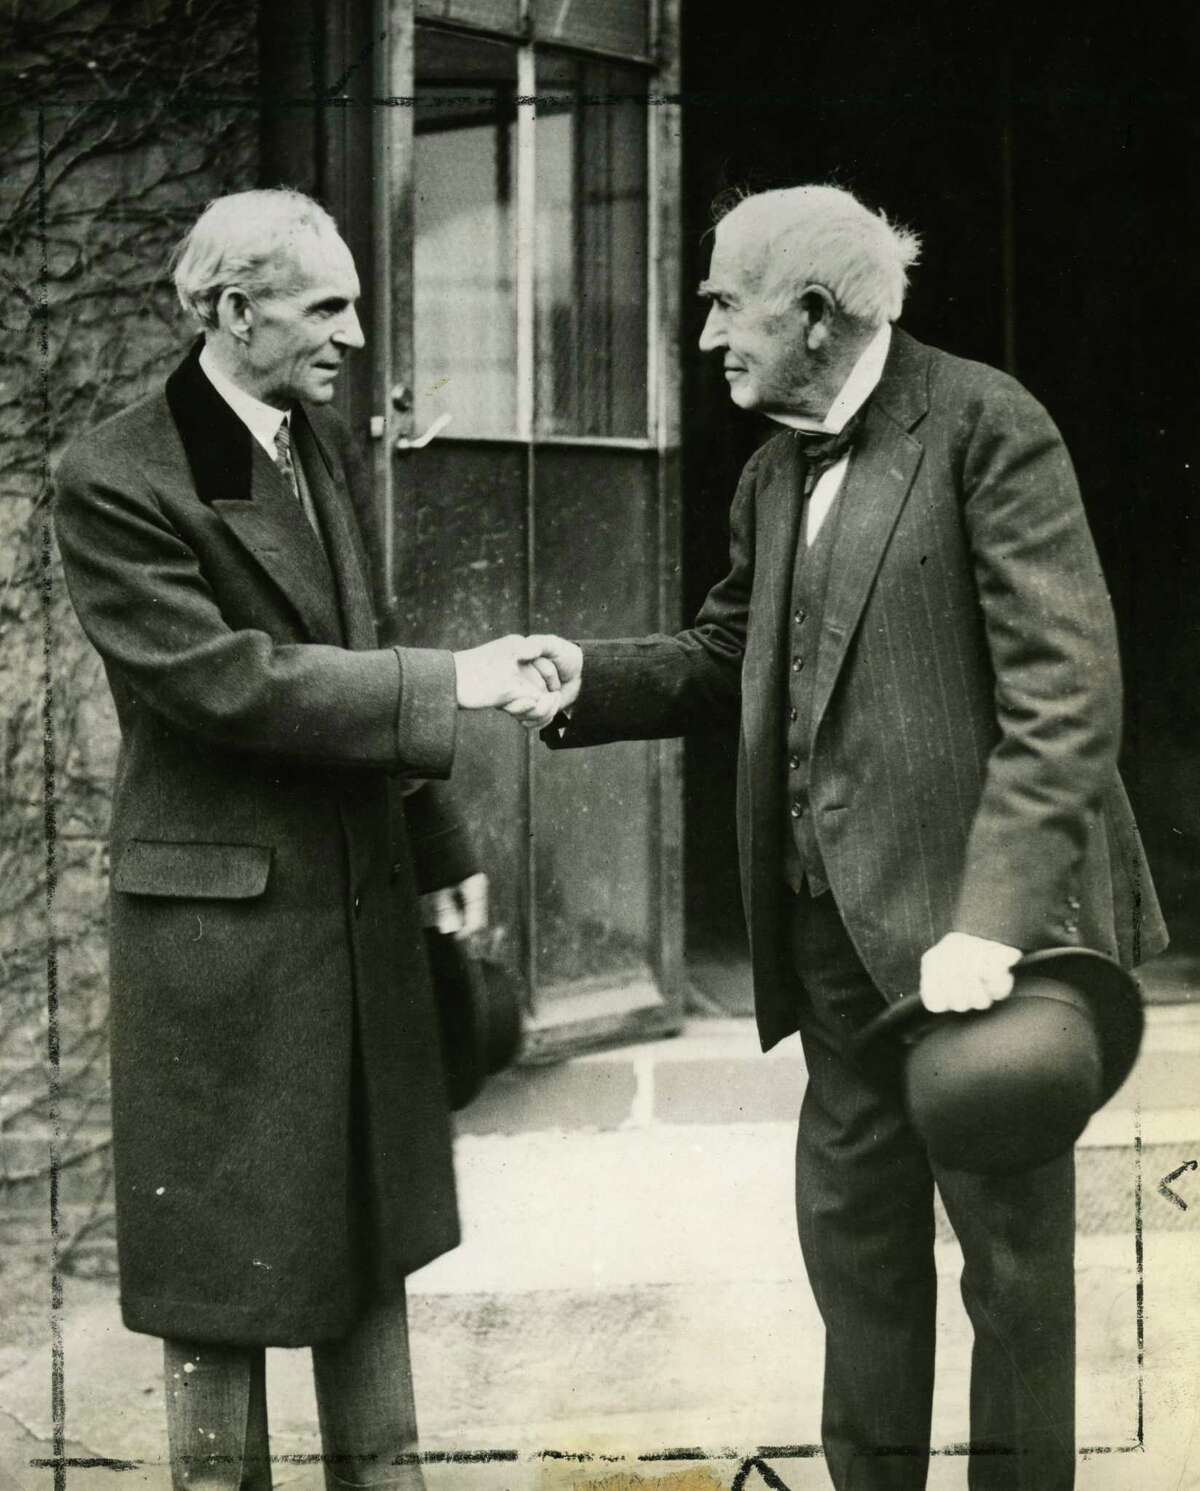 Thomas Edison, right, and Henry Ford shake hands, ca. 1920s. (Wide World Photo/Times Union archive print)